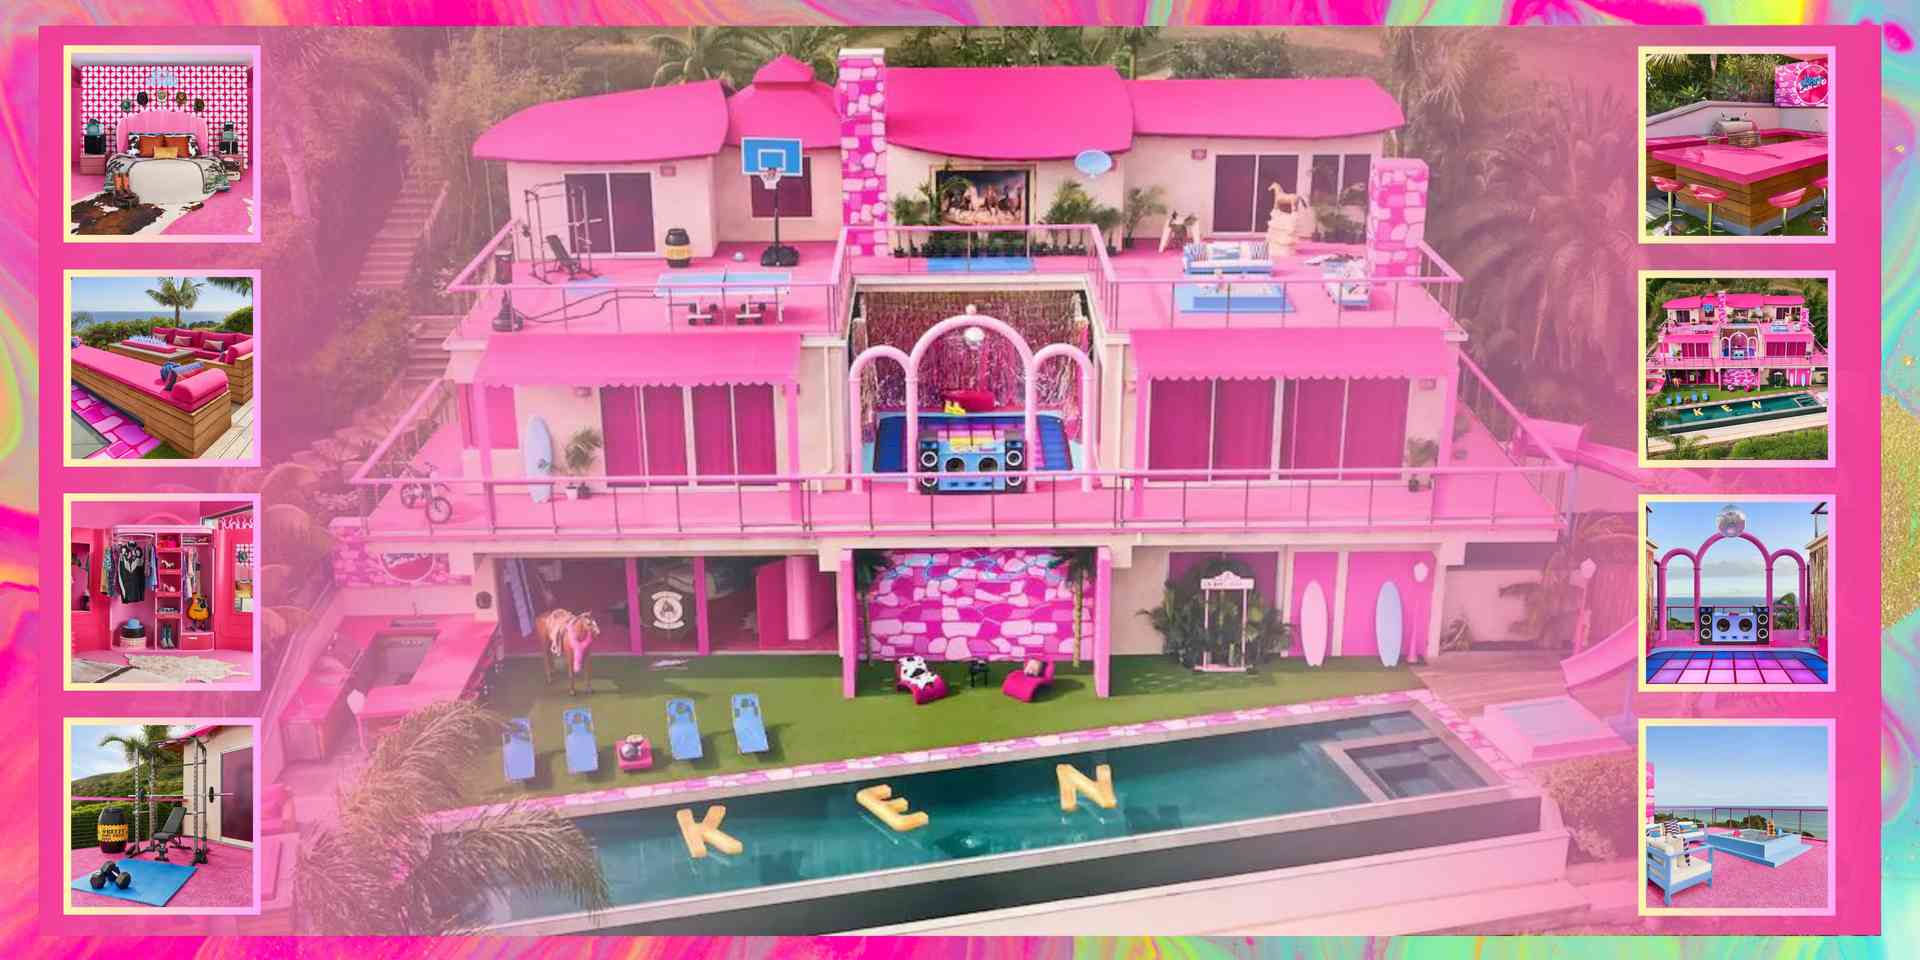 LOOK: Barbie's Dreamhouse is now available to book in AirBnB